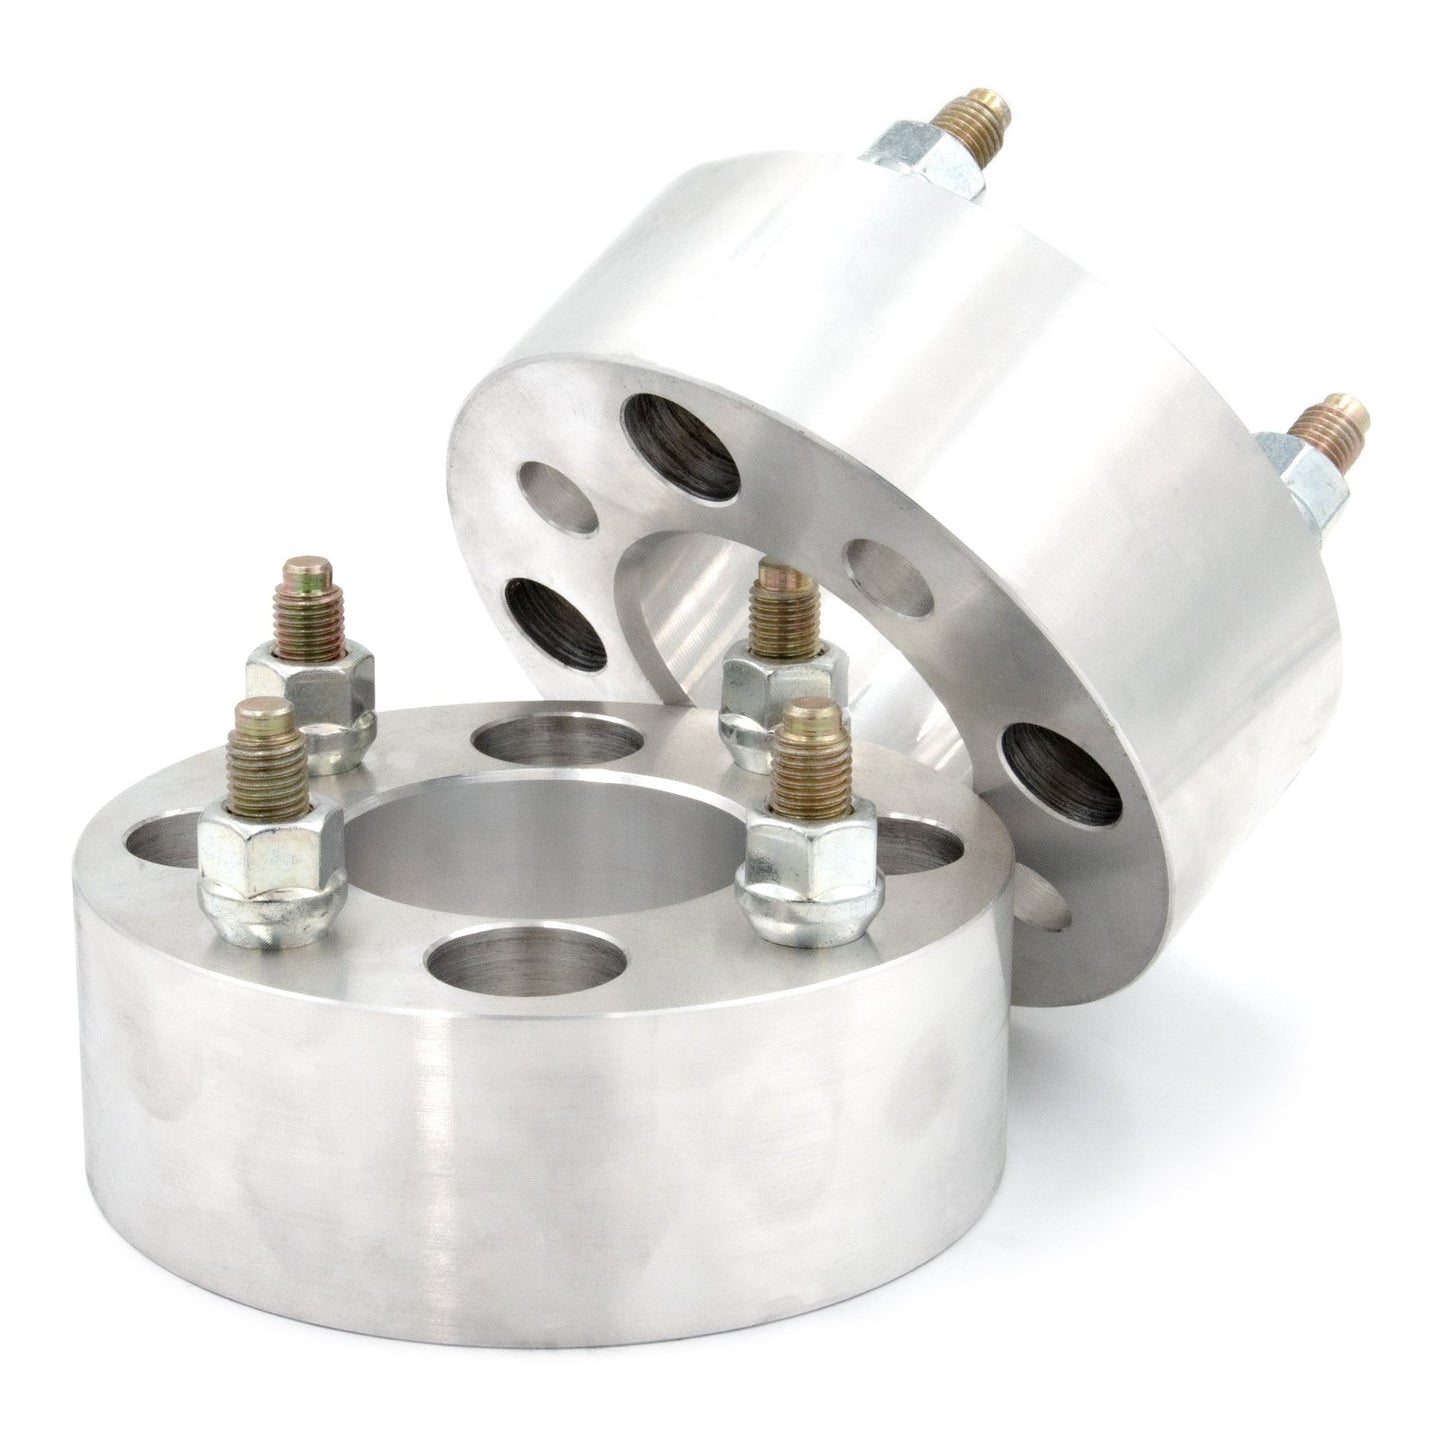 4x100 to 4x140 Wheel Spacer/Adapter - Thickness: 3/4"- 4"